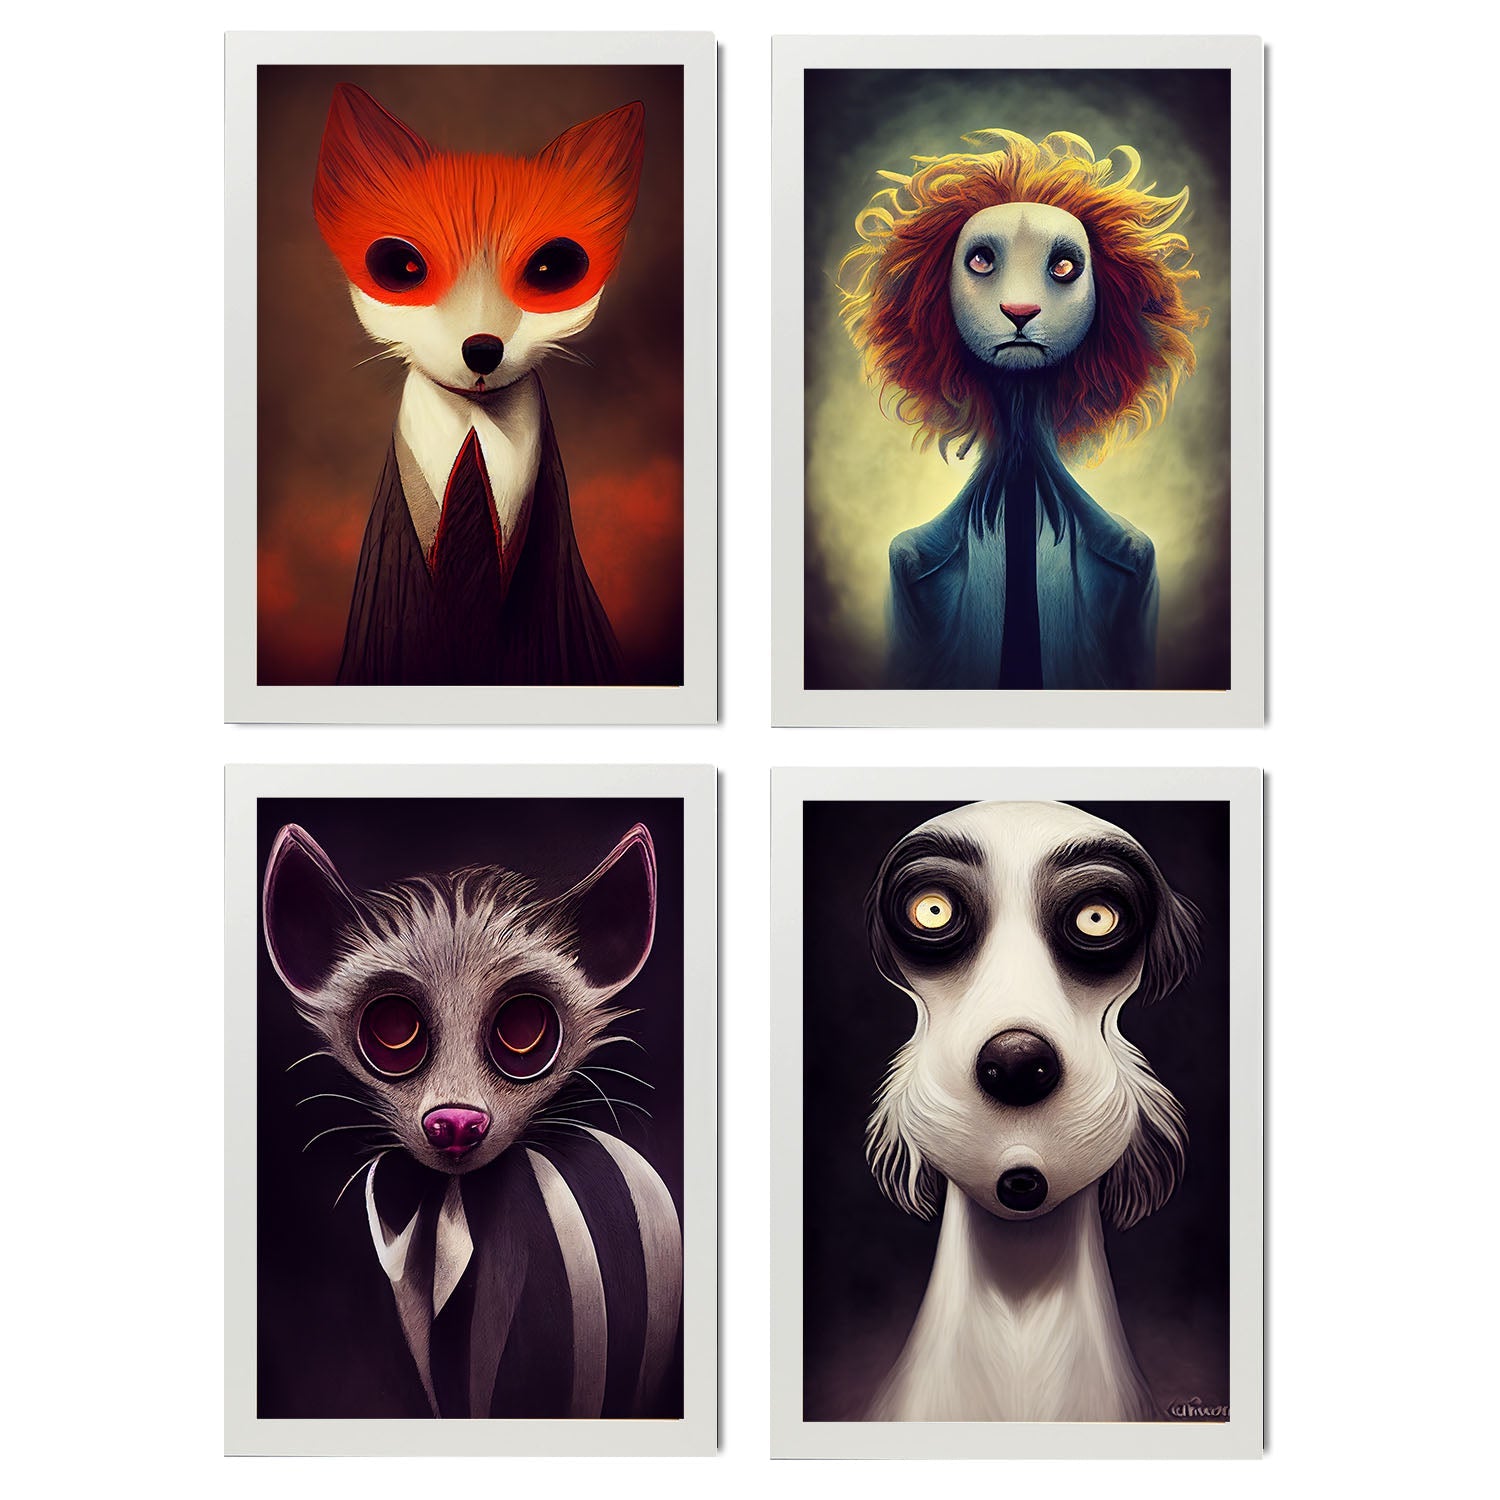 Burton style Animal Illustrations and Posters inspired by Burton's Dark and Goth art Interior Design and Decoration Set Collection 7-Artwork-Nacnic-A4-Marco Blanco-Nacnic Estudio SL